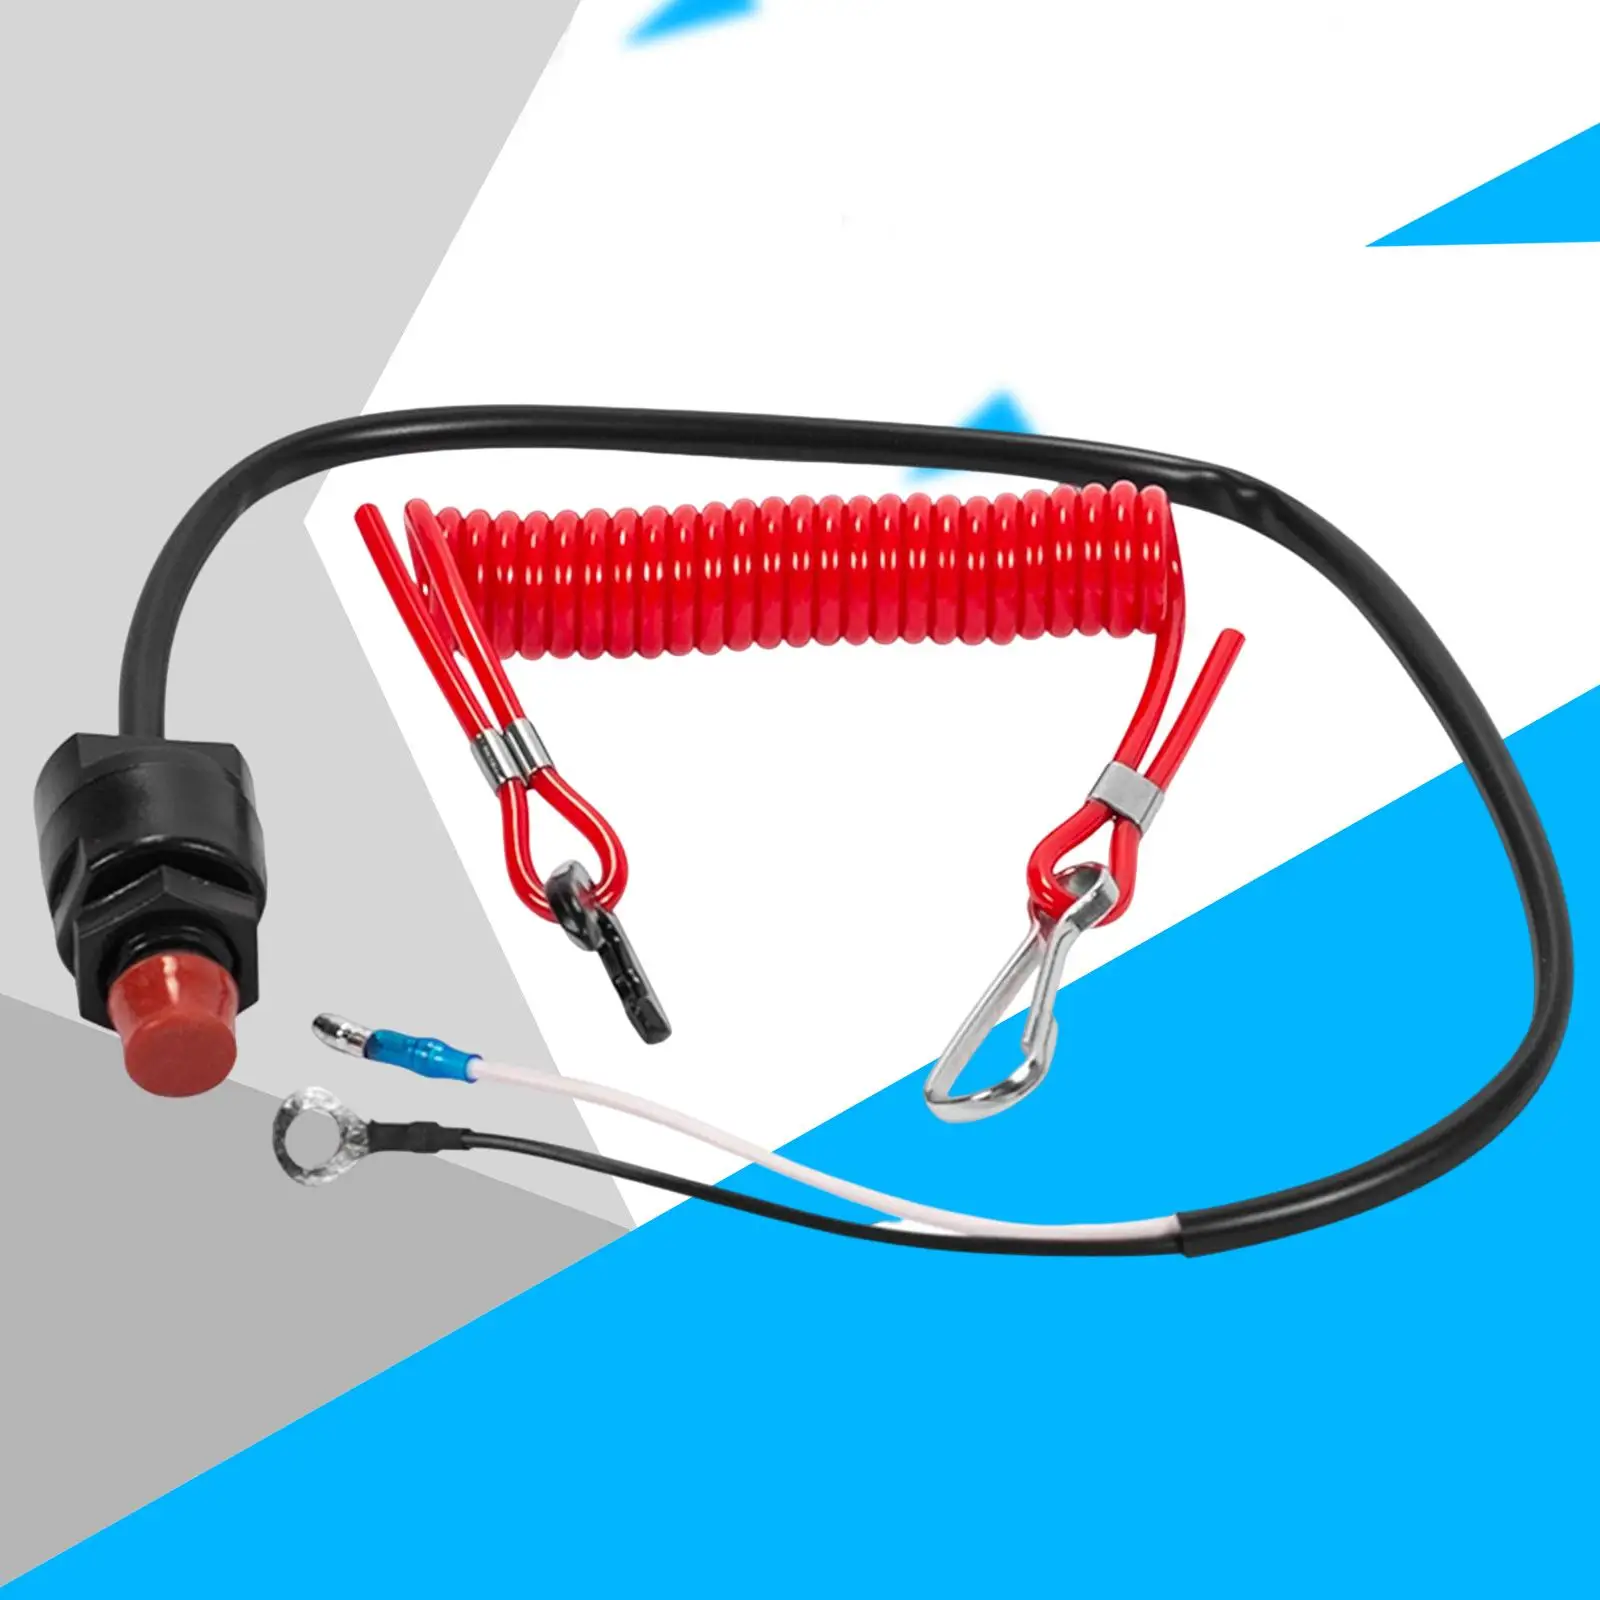 Flameout Switch  Out Key Lanyard Strap Cord Suit Ignition Rope for Motorboat